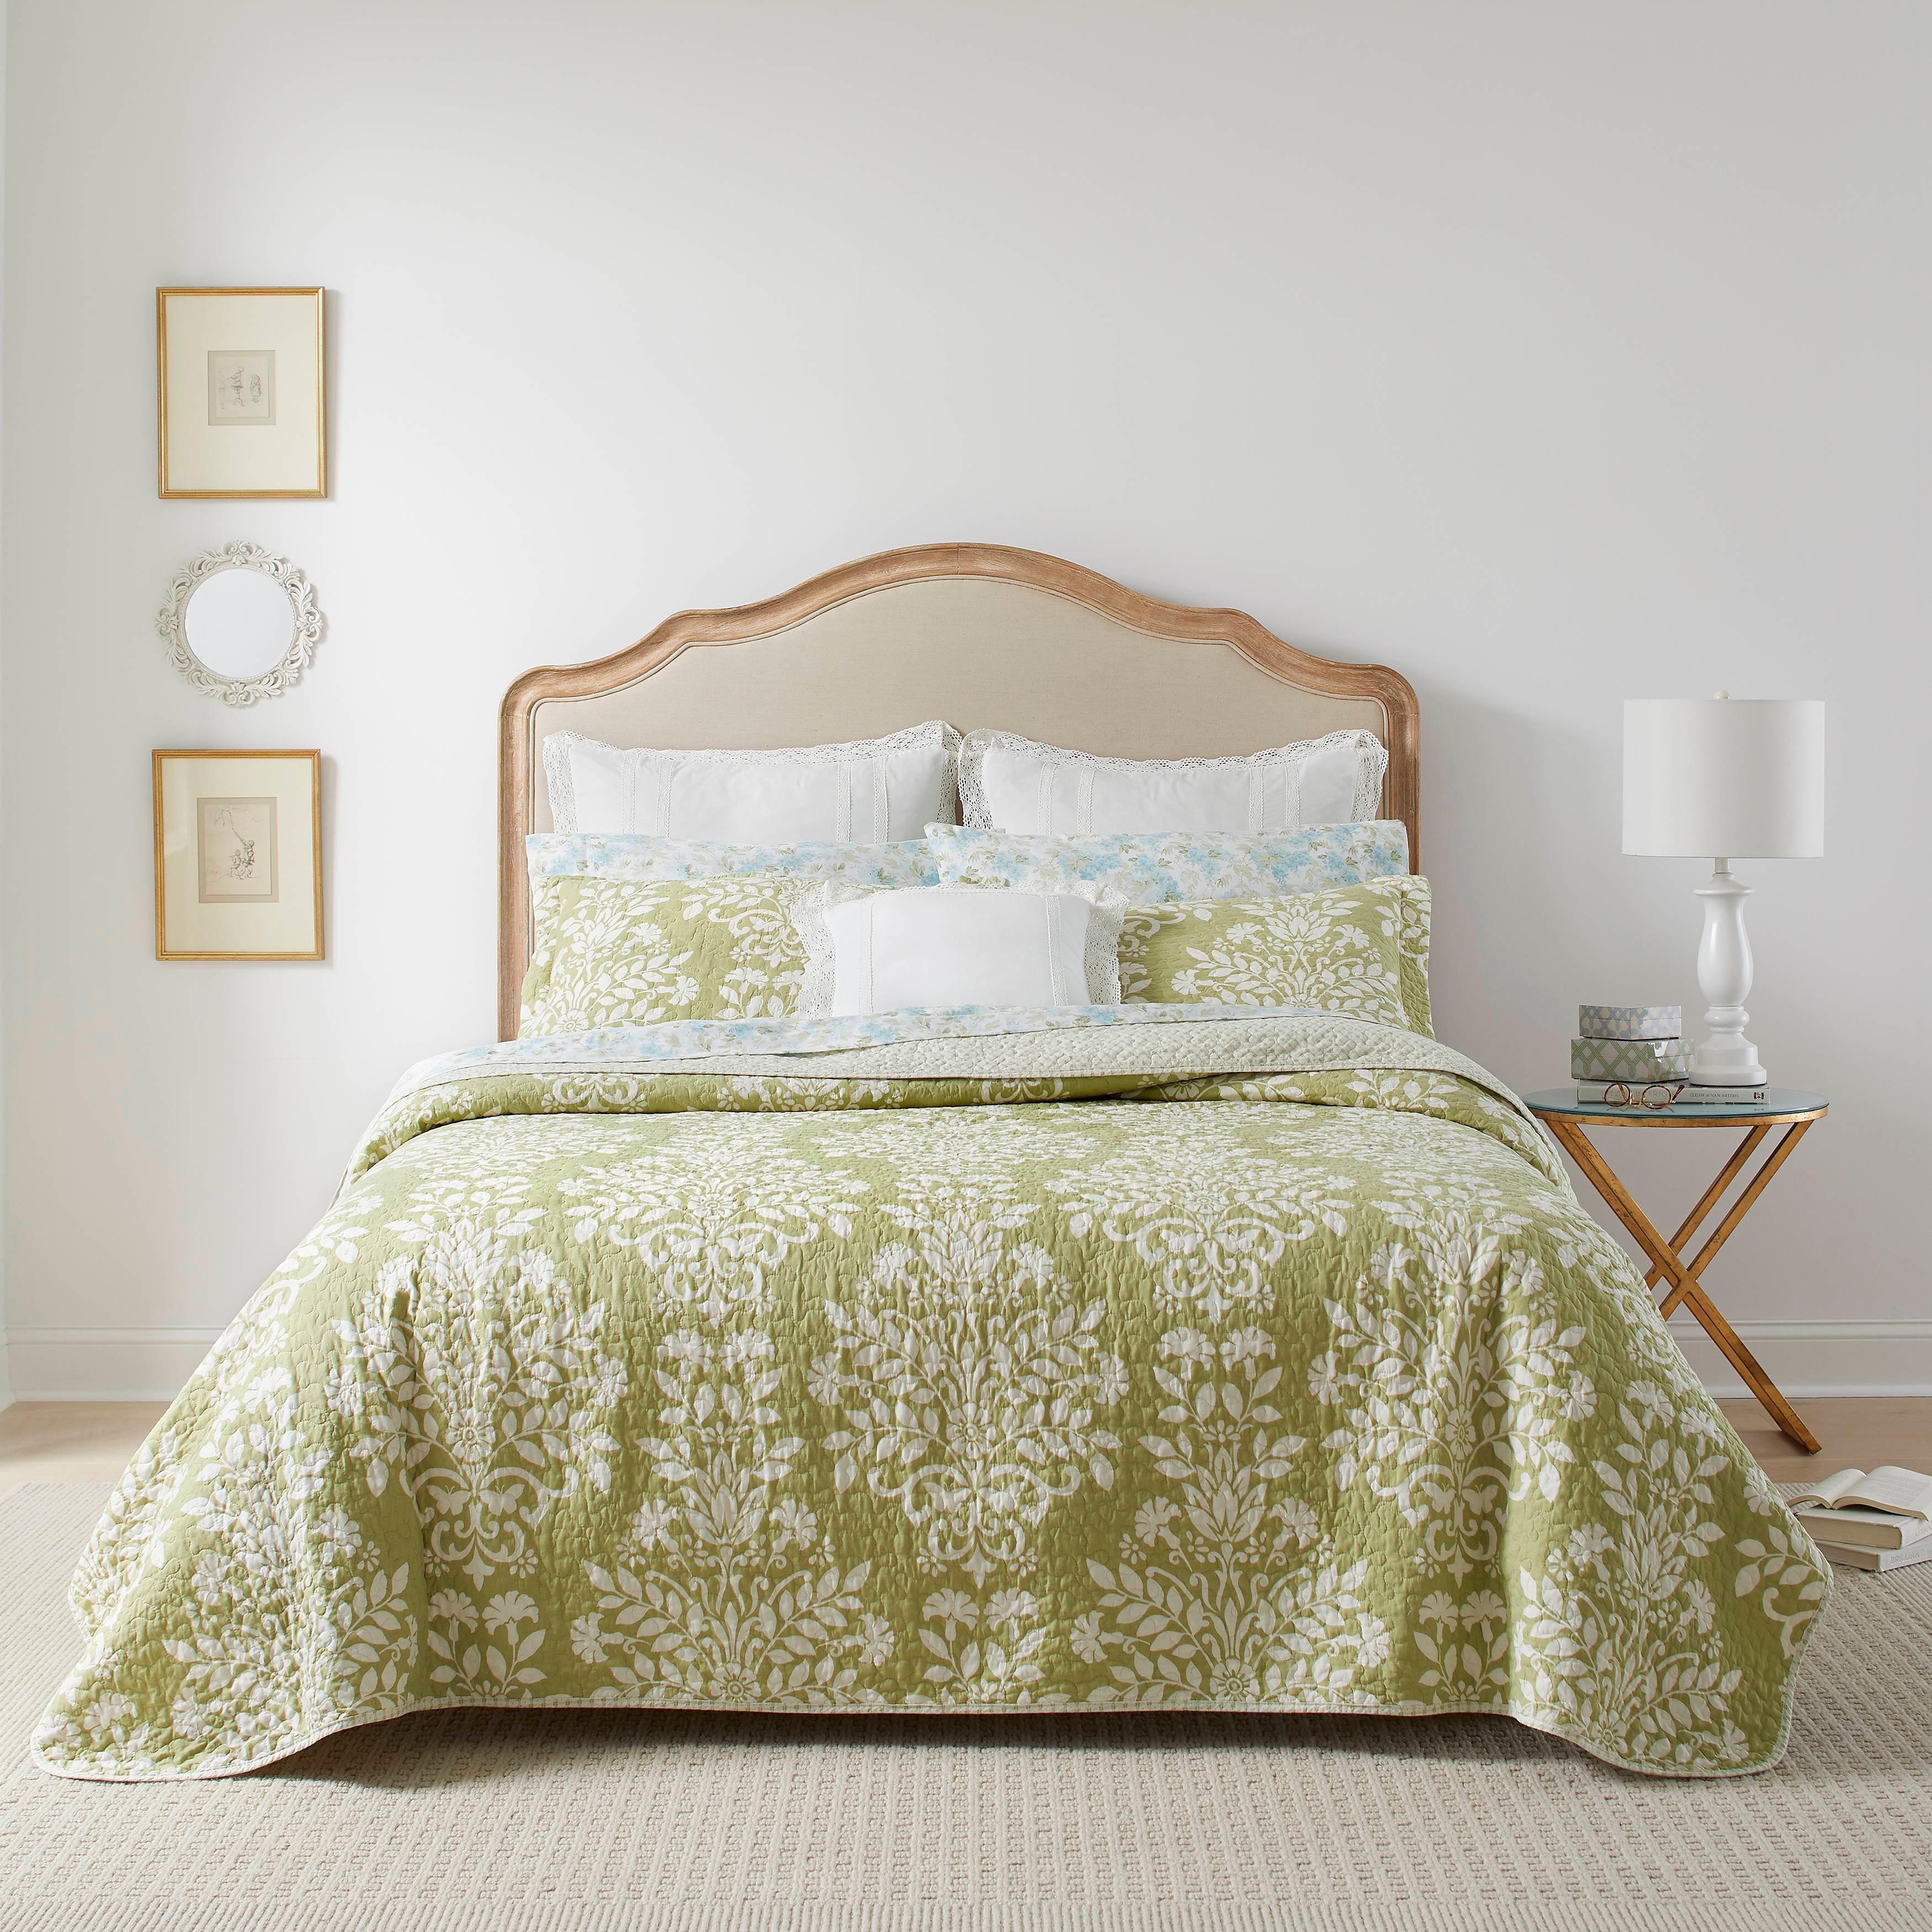 Laura Ashley Felicity Collection Quilt Set-100% Cotton, Reversible, All  Season Bedding with Matching Sham(s), Pre-Washed for Added Softness, Queen